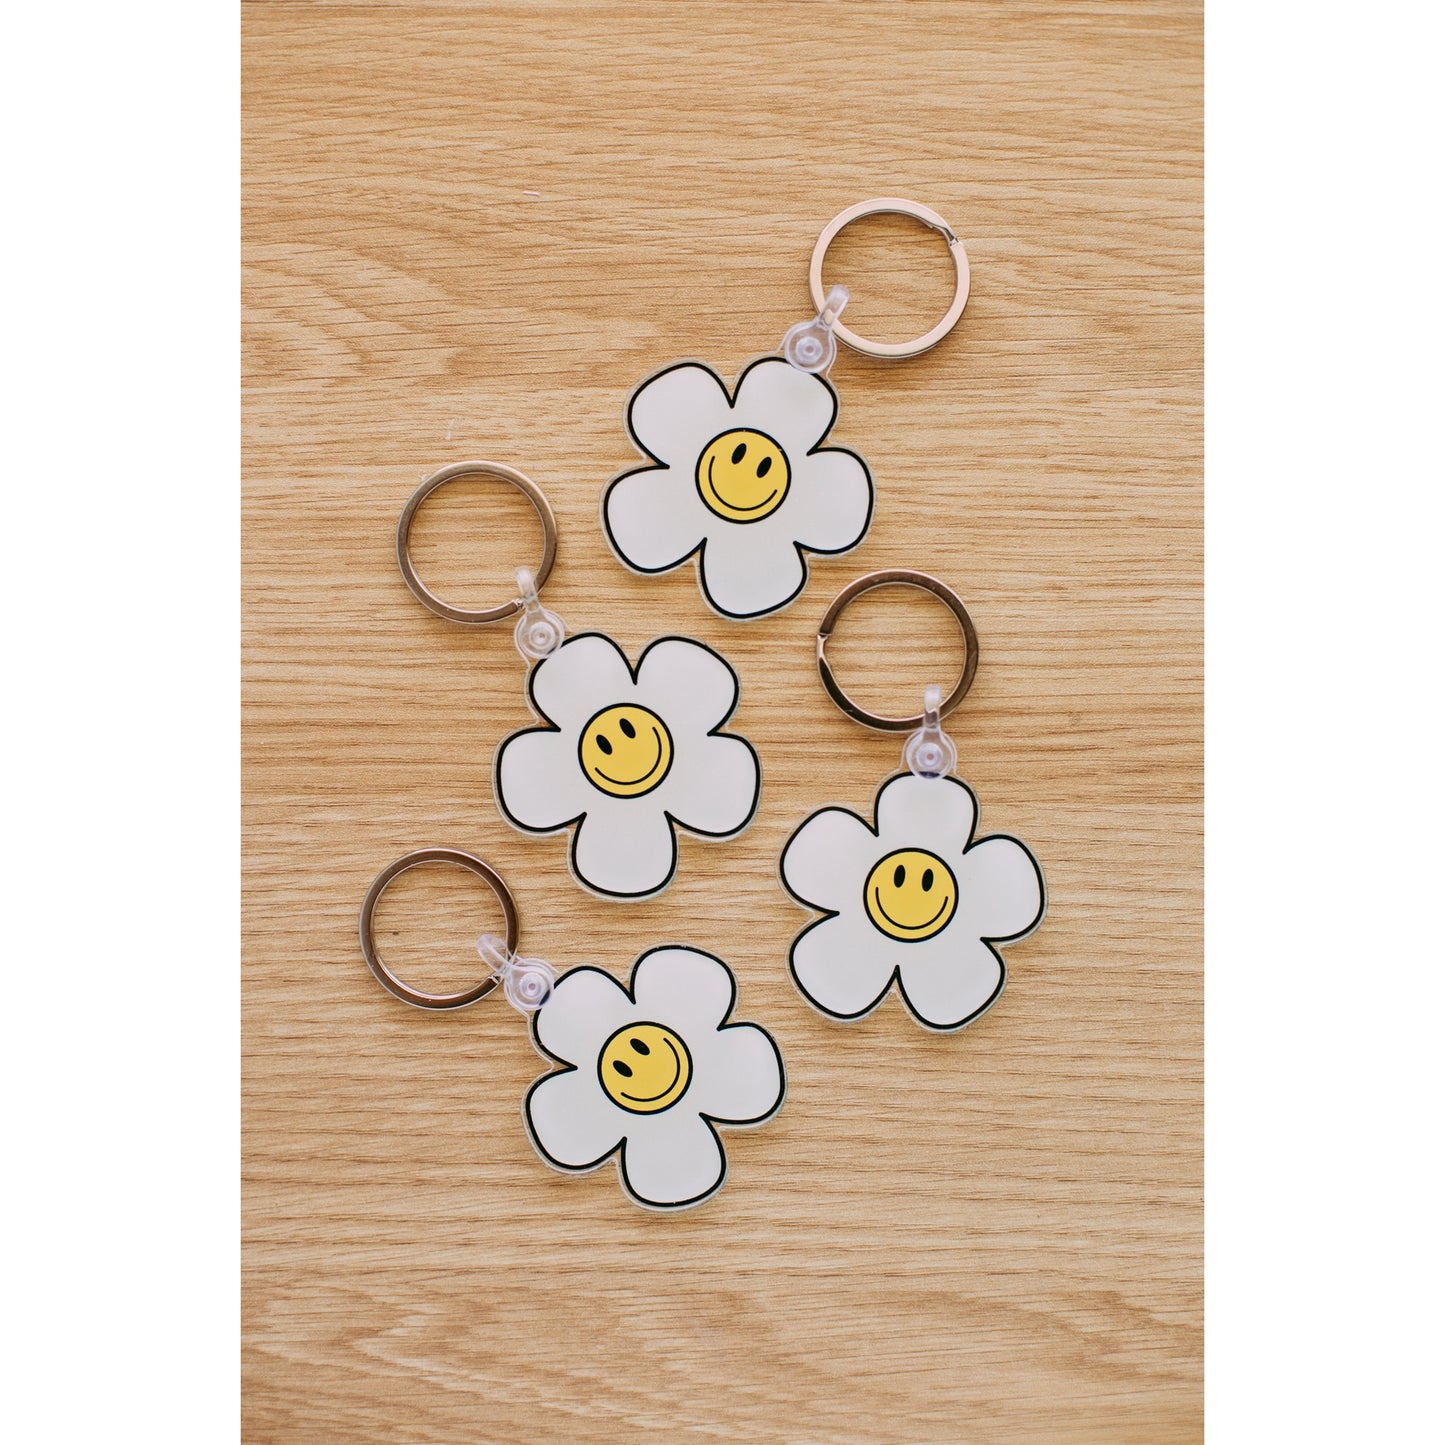 Retro Daisy Keychain,ACCESSORIES,KEYCHAINS, SMILEY FACE- DEFIANT